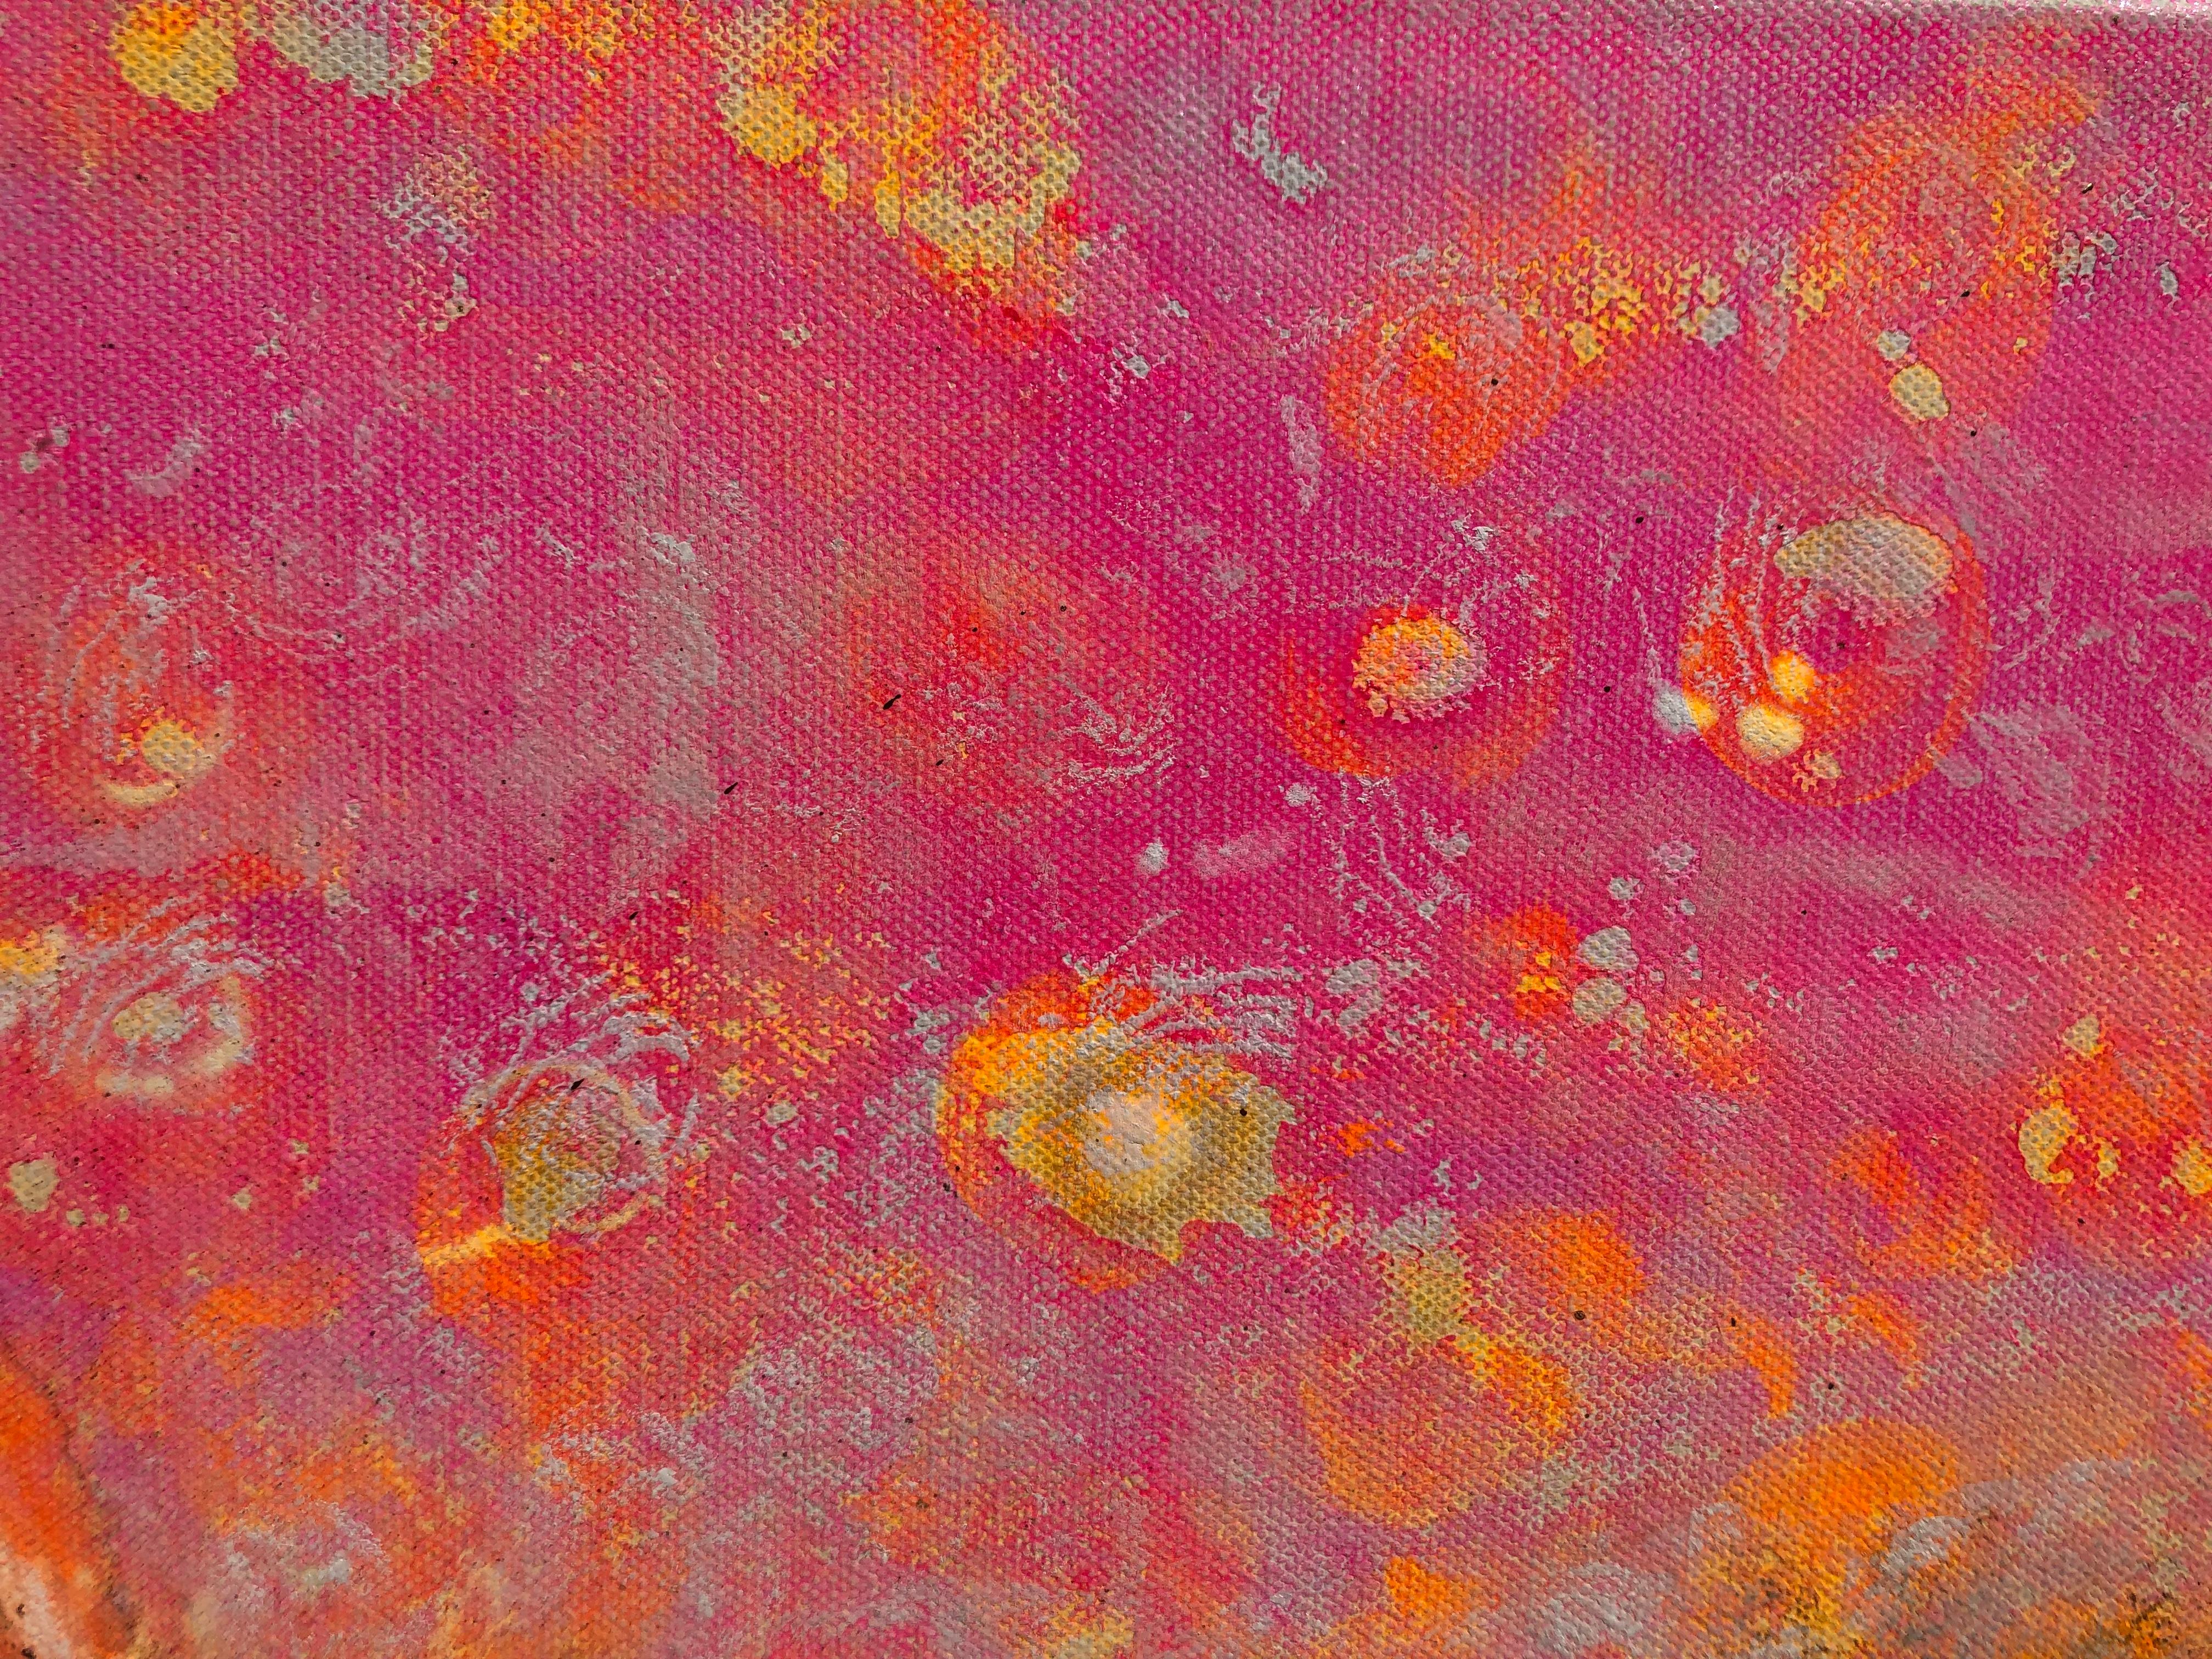 Morning levitation 2 - Painting on canvas, abstract metaphysical, gold, pink im Angebot 6